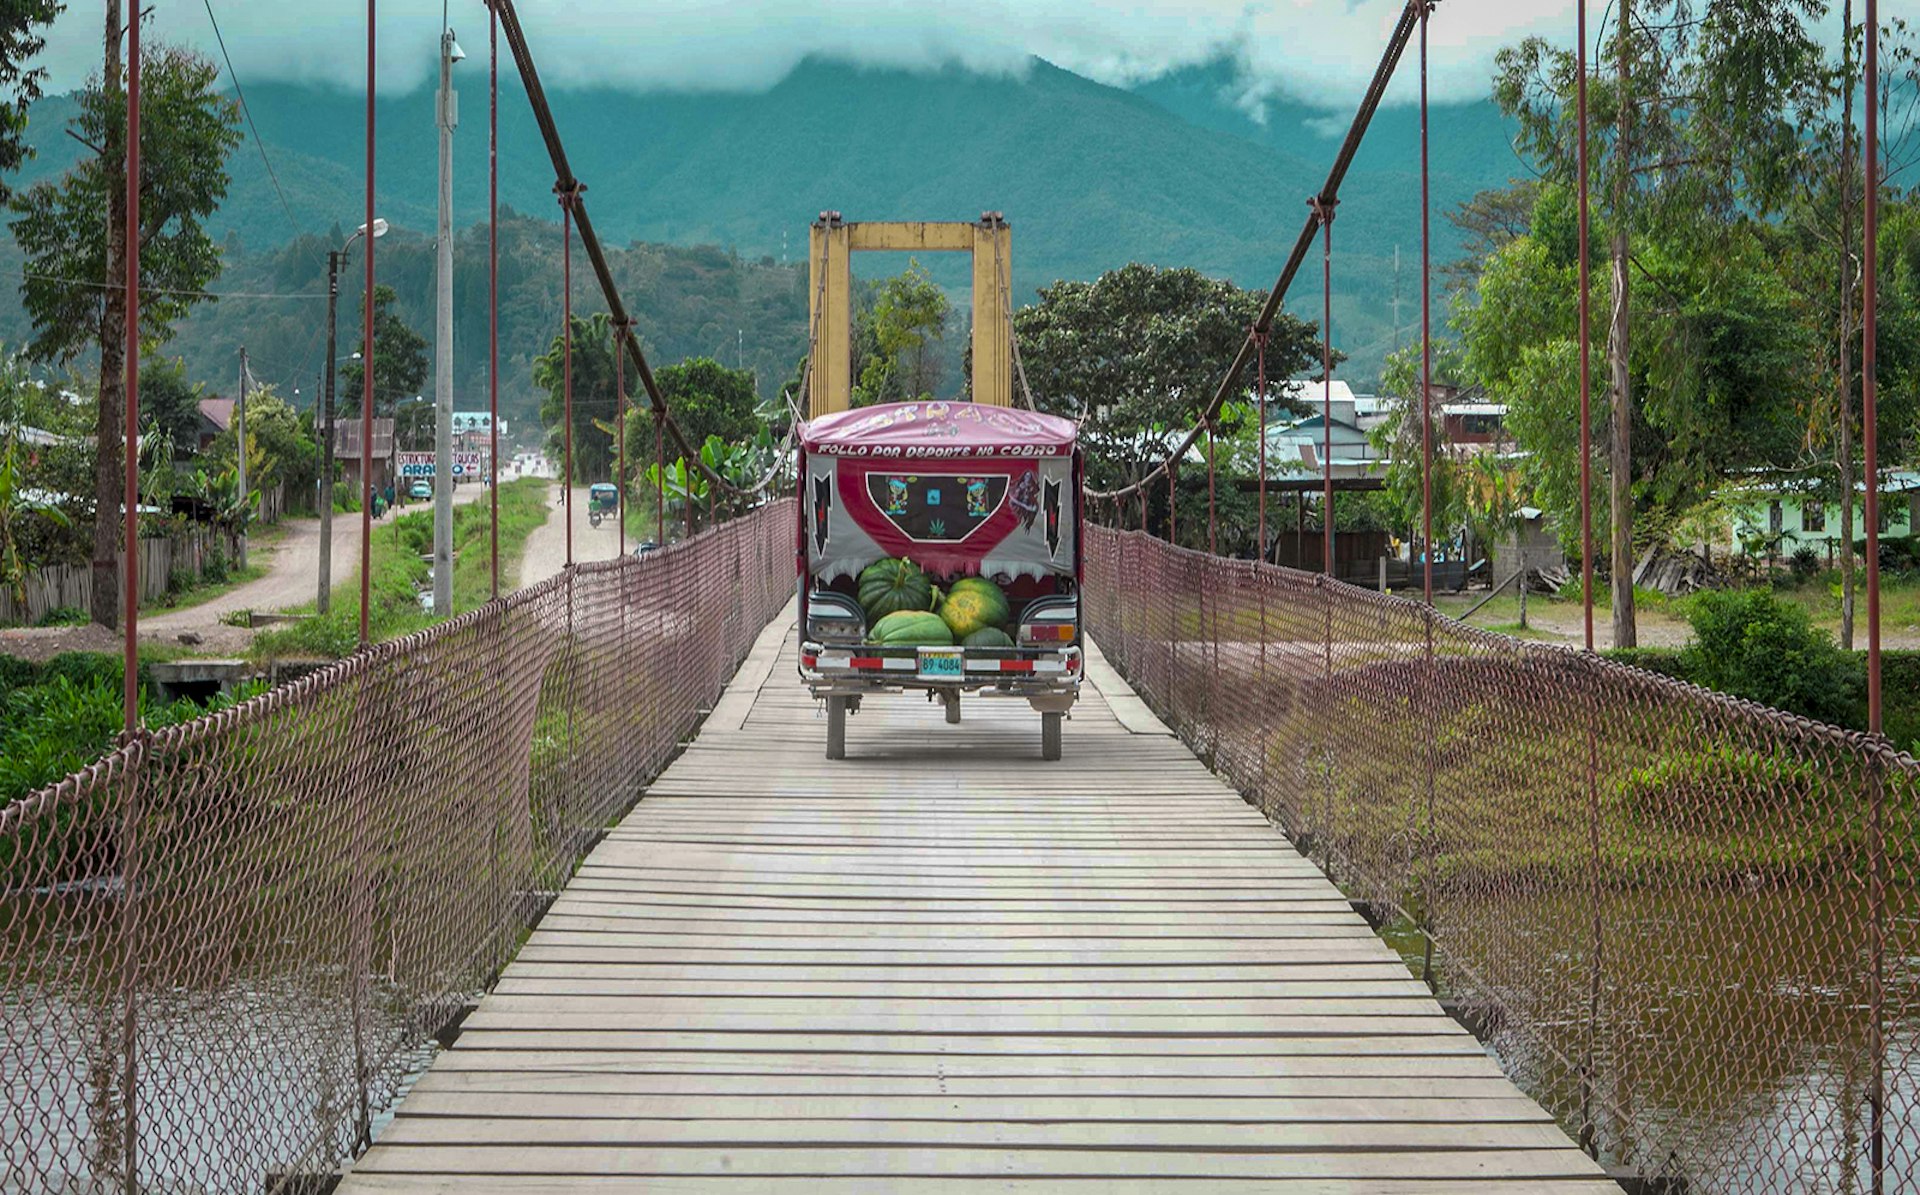 A cart with watermelons int he back goes across a wooden bridge © Erick Andía / Lonely Planet